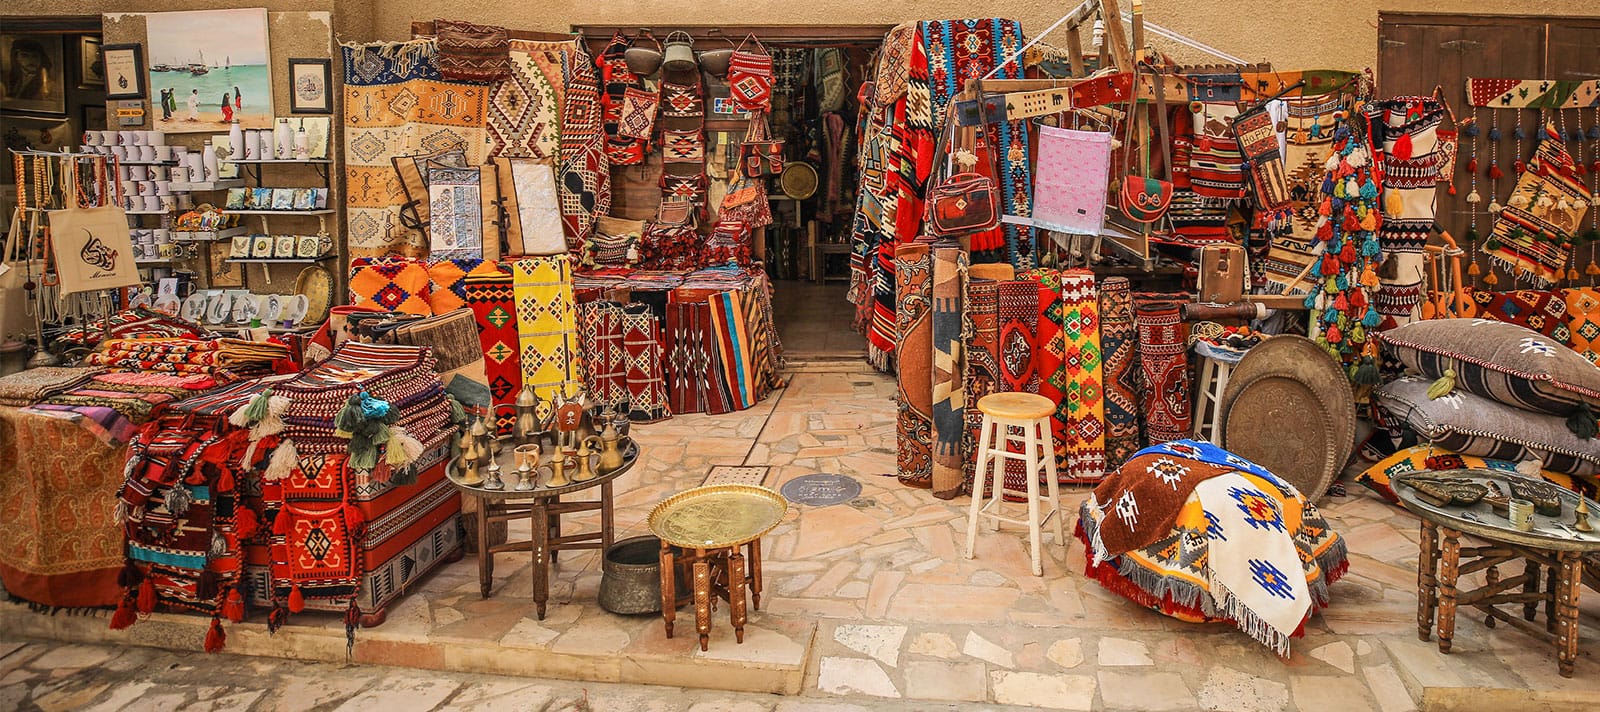 Stylish.aes Ultimate Guide: Traditional Souks Every Visitor Must Experience